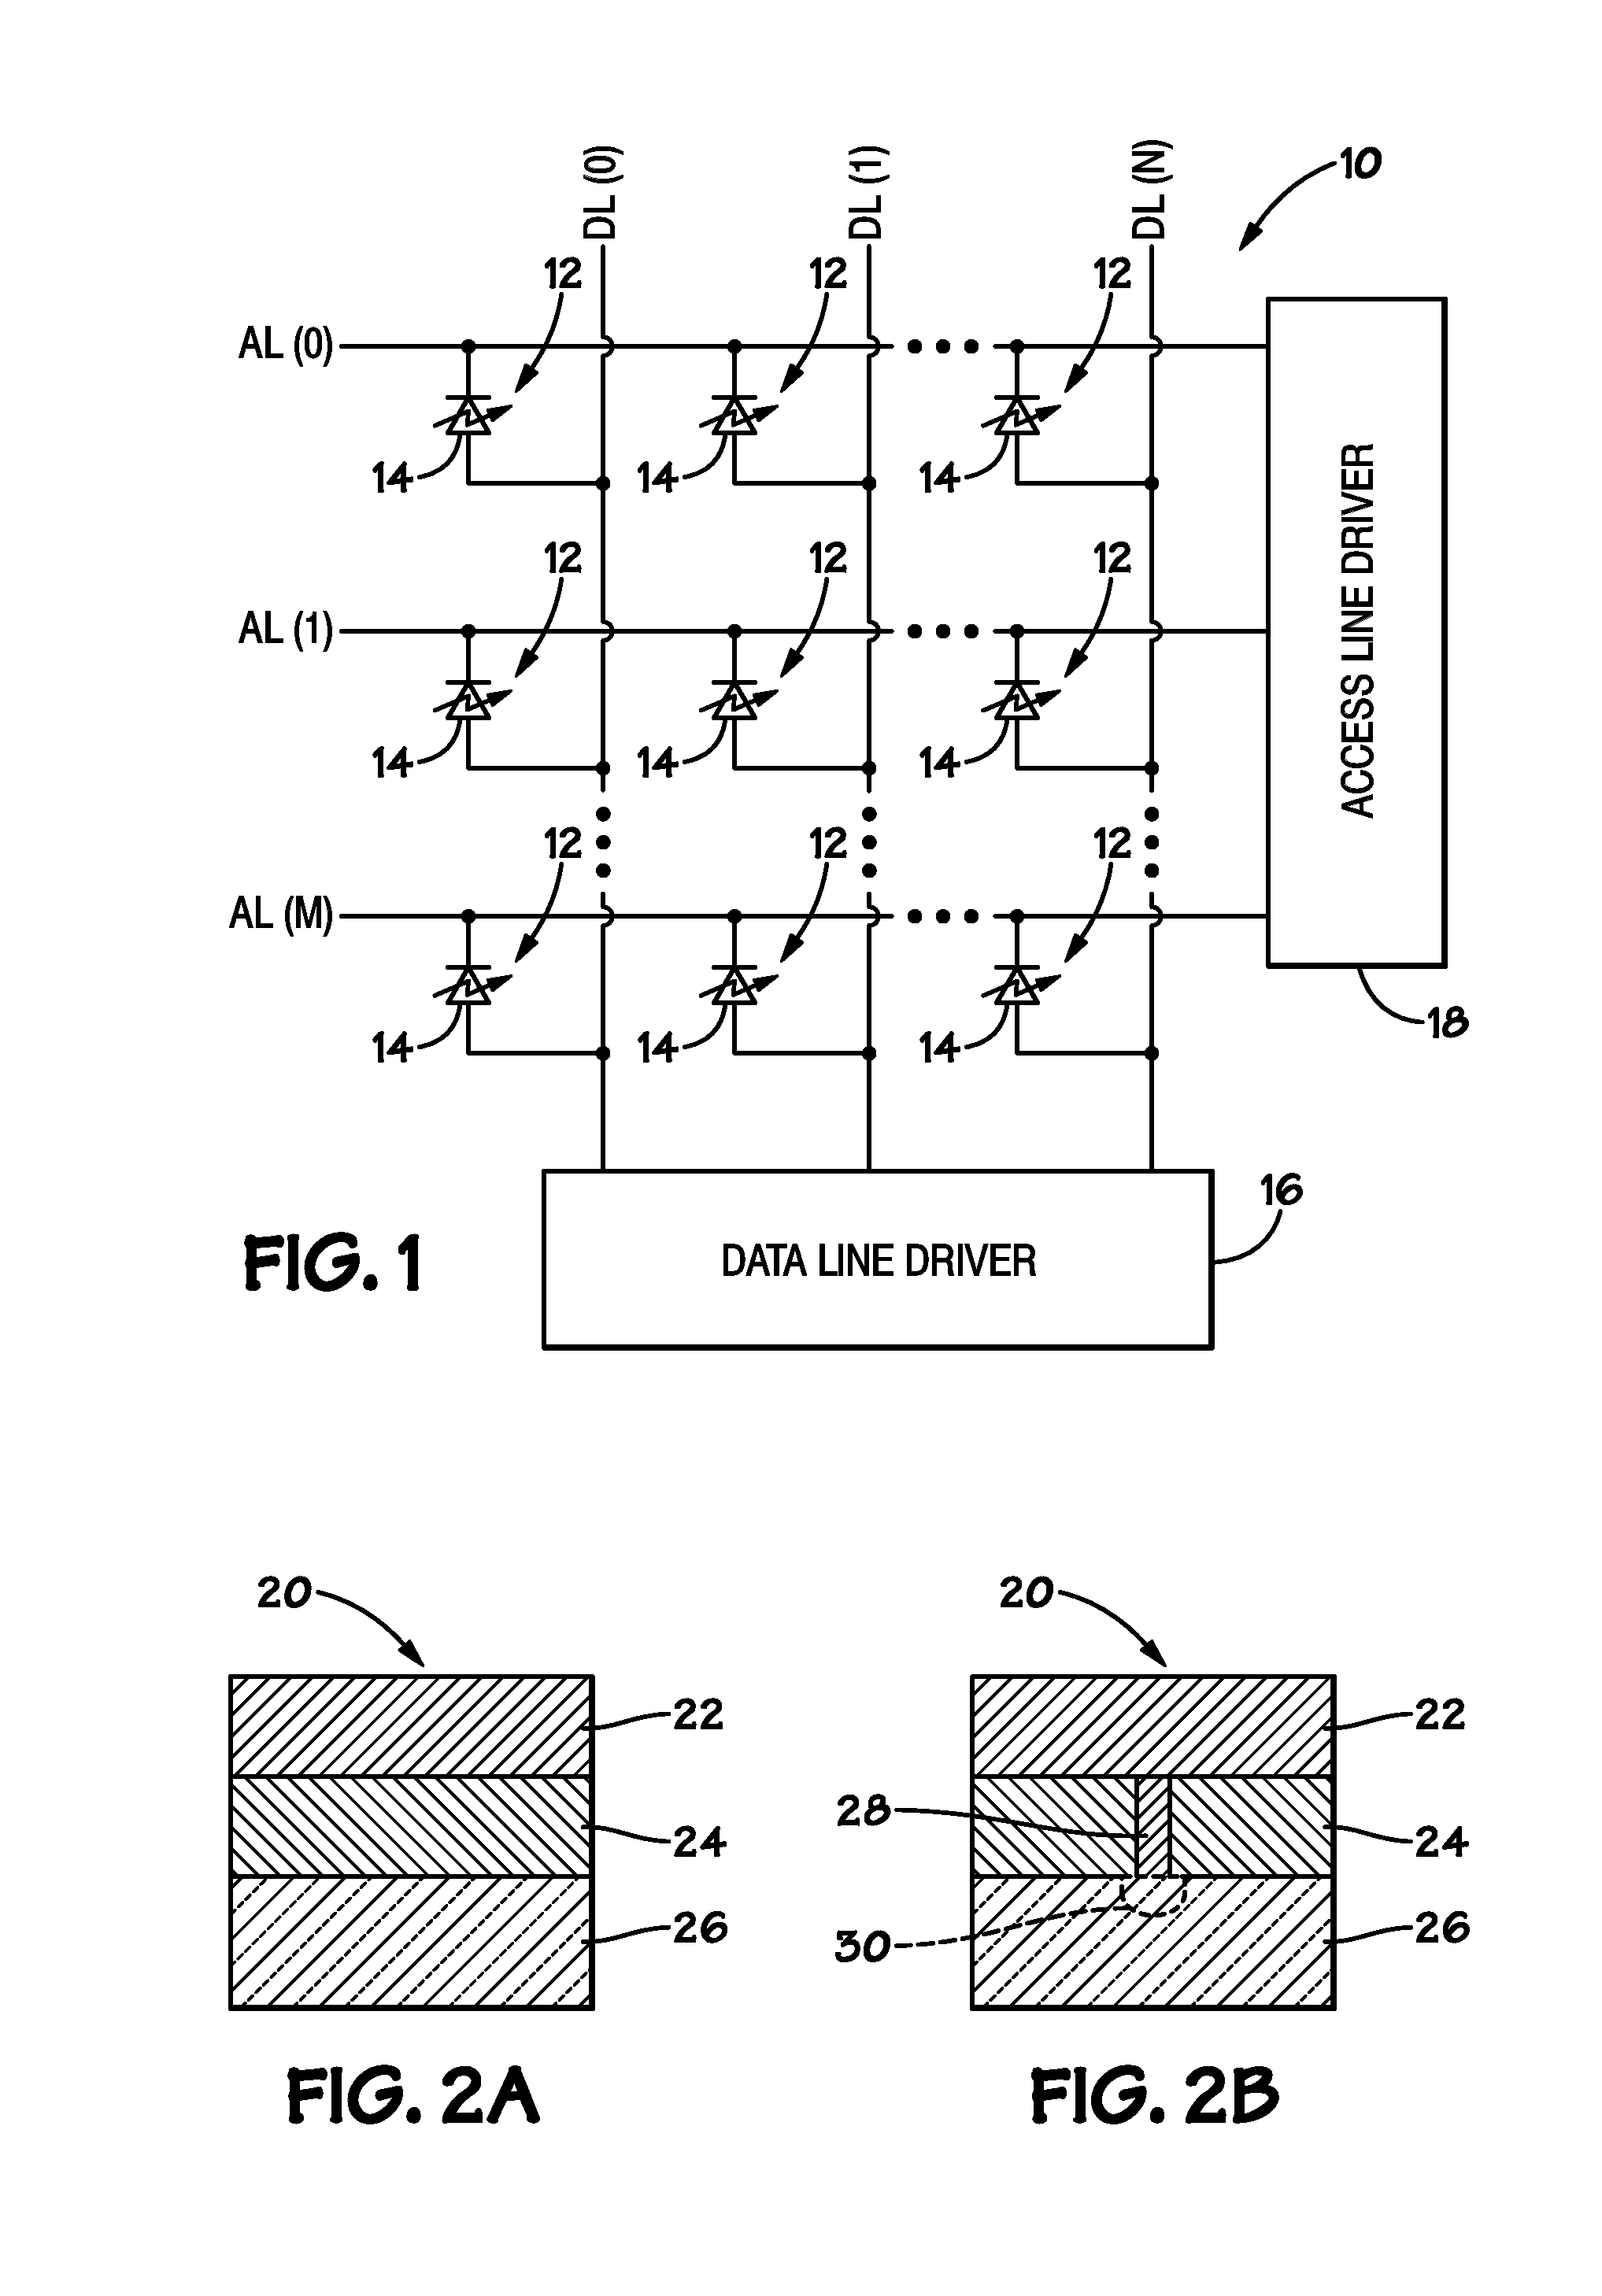 Bipolar Switching Memory Cell With Built-in "On" State Rectifying Current-Voltage Characteristics